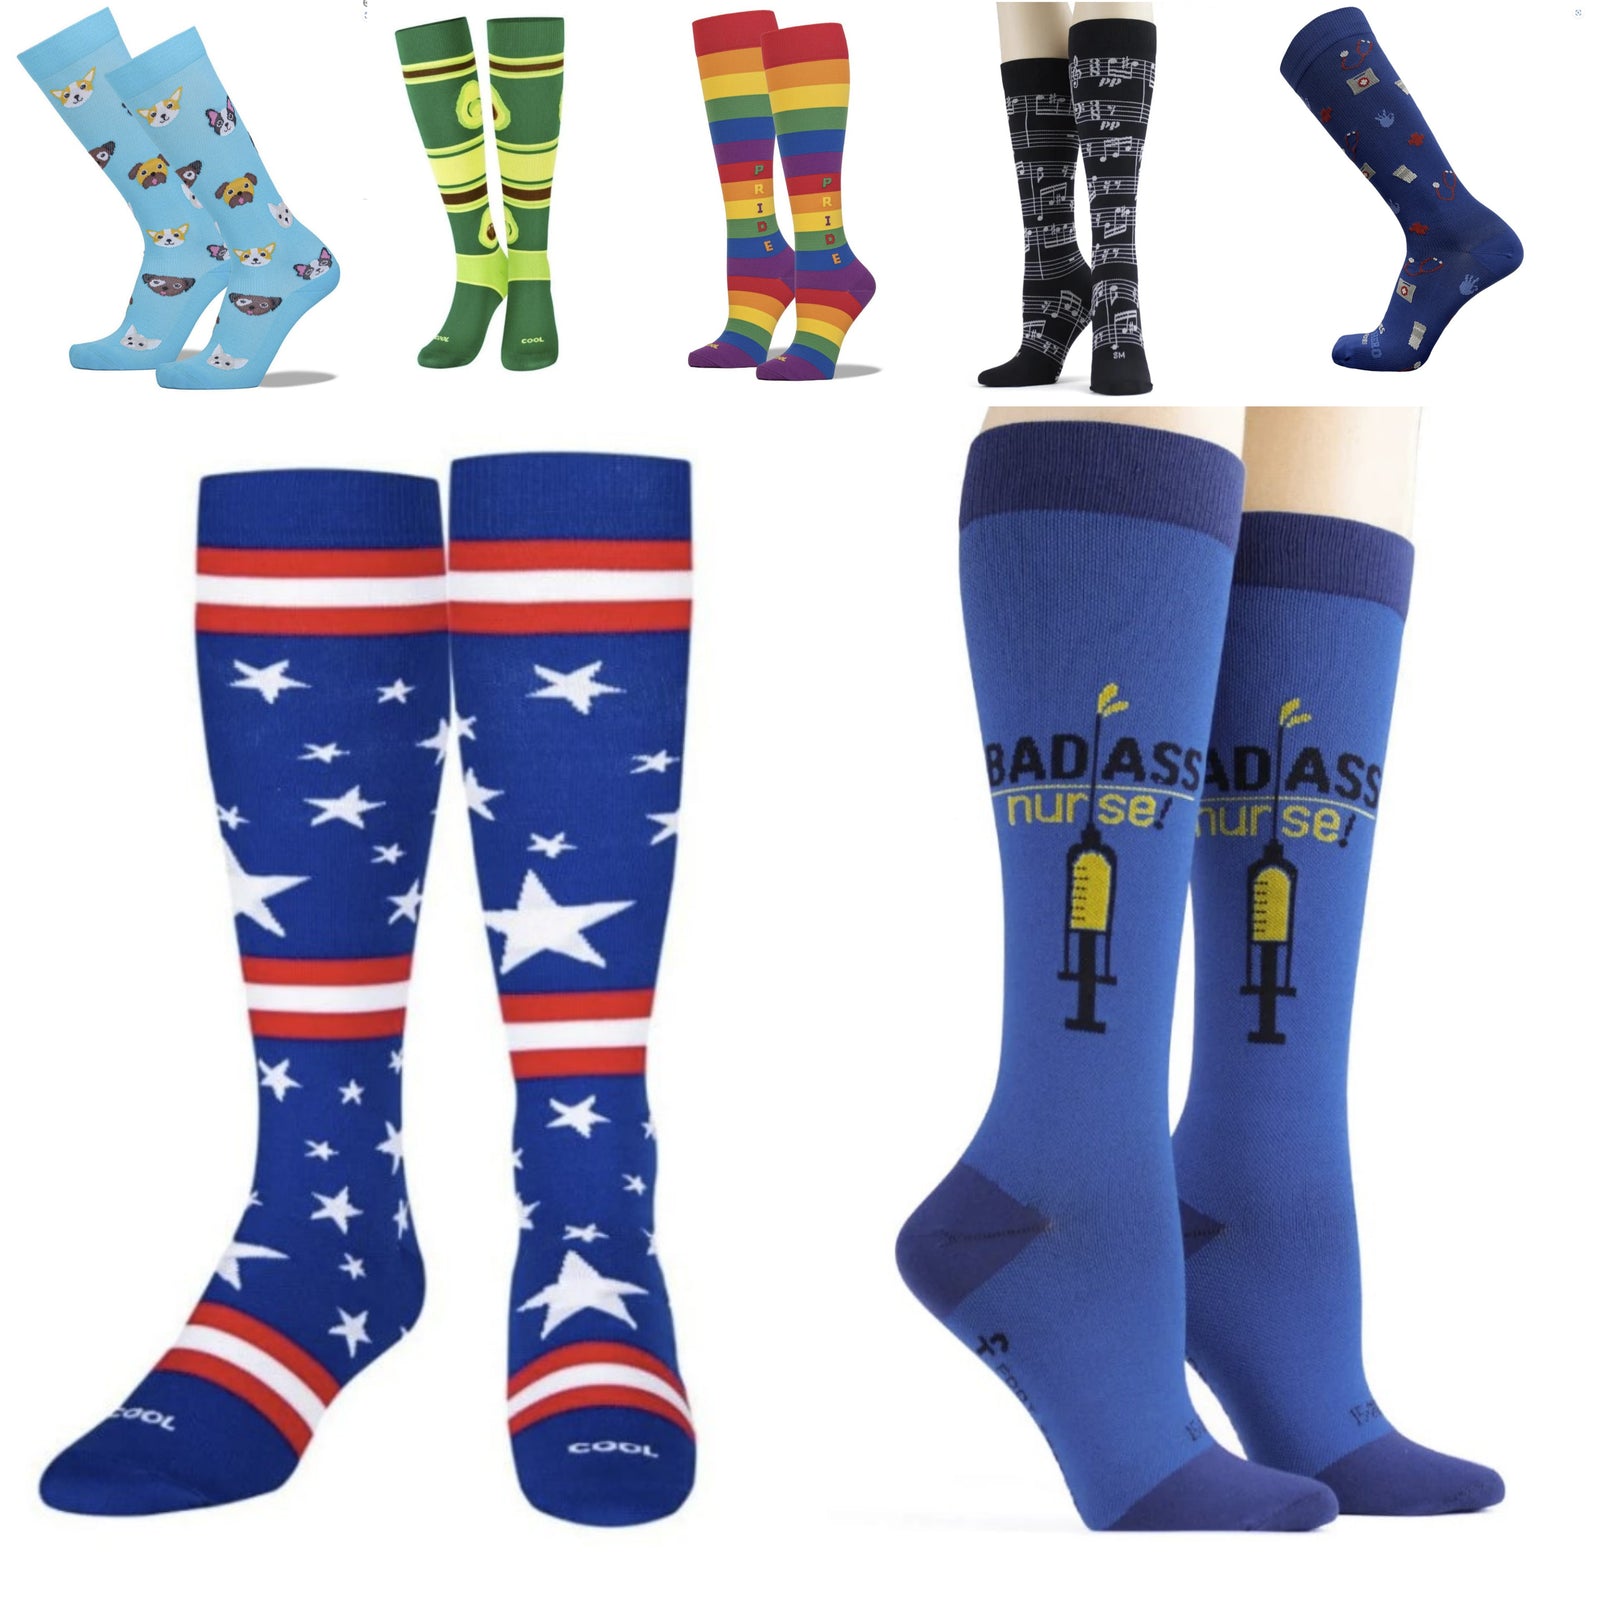 Feel The Squeeze: Why You Should Be Wearing Compression Socks On yo